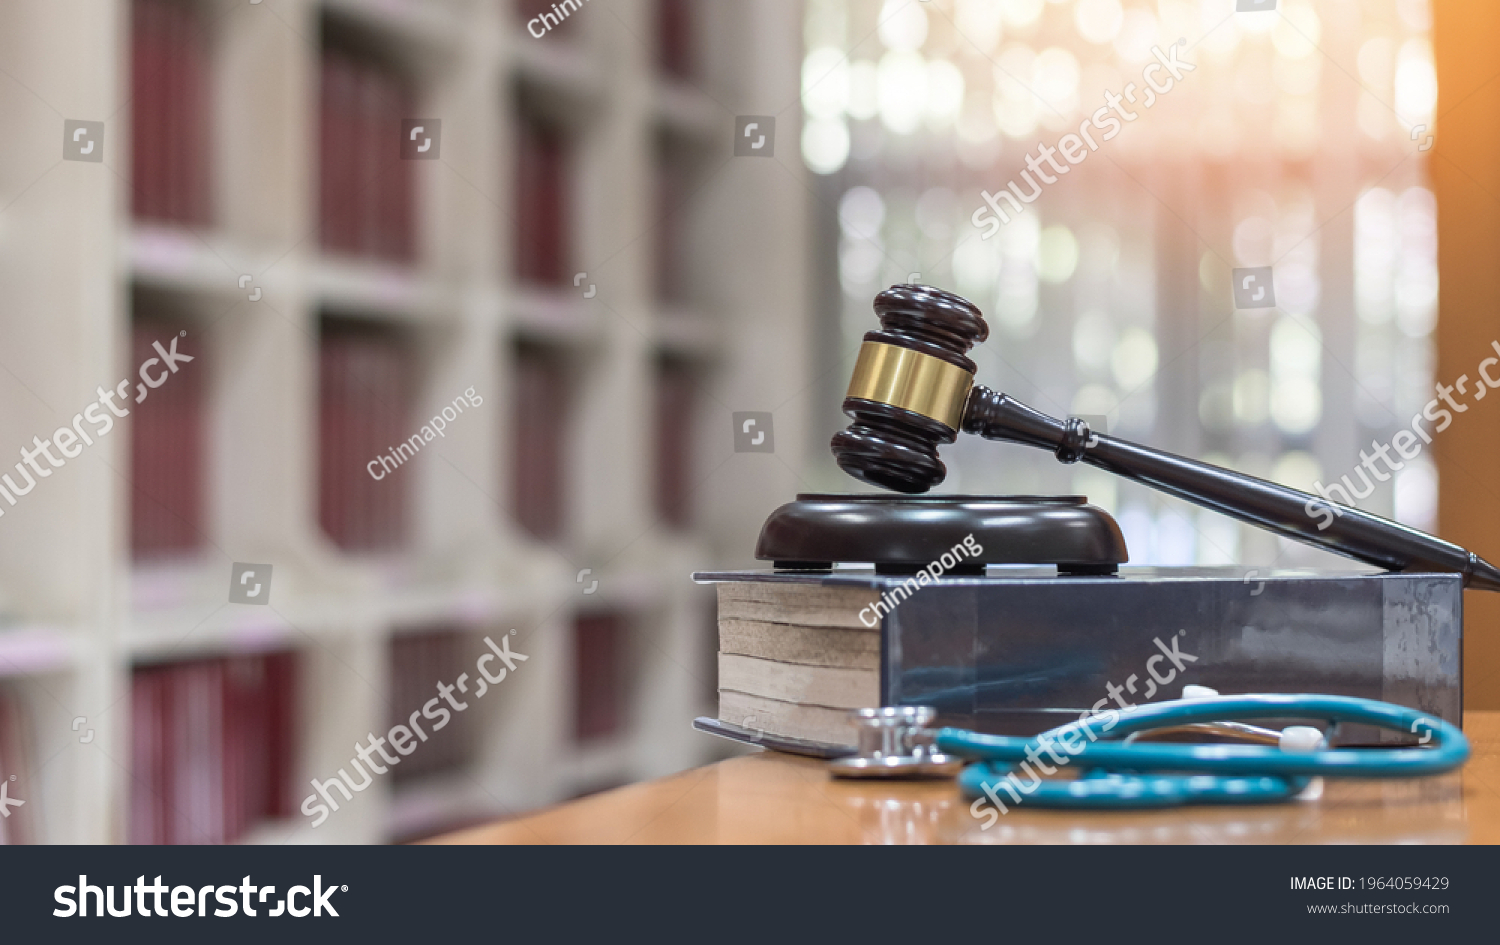 Forensic medicine science, criminalistics legal investigation or medical practice justice concept with judge gavel on law text book for criminal and civil laws in school class or library #1964059429